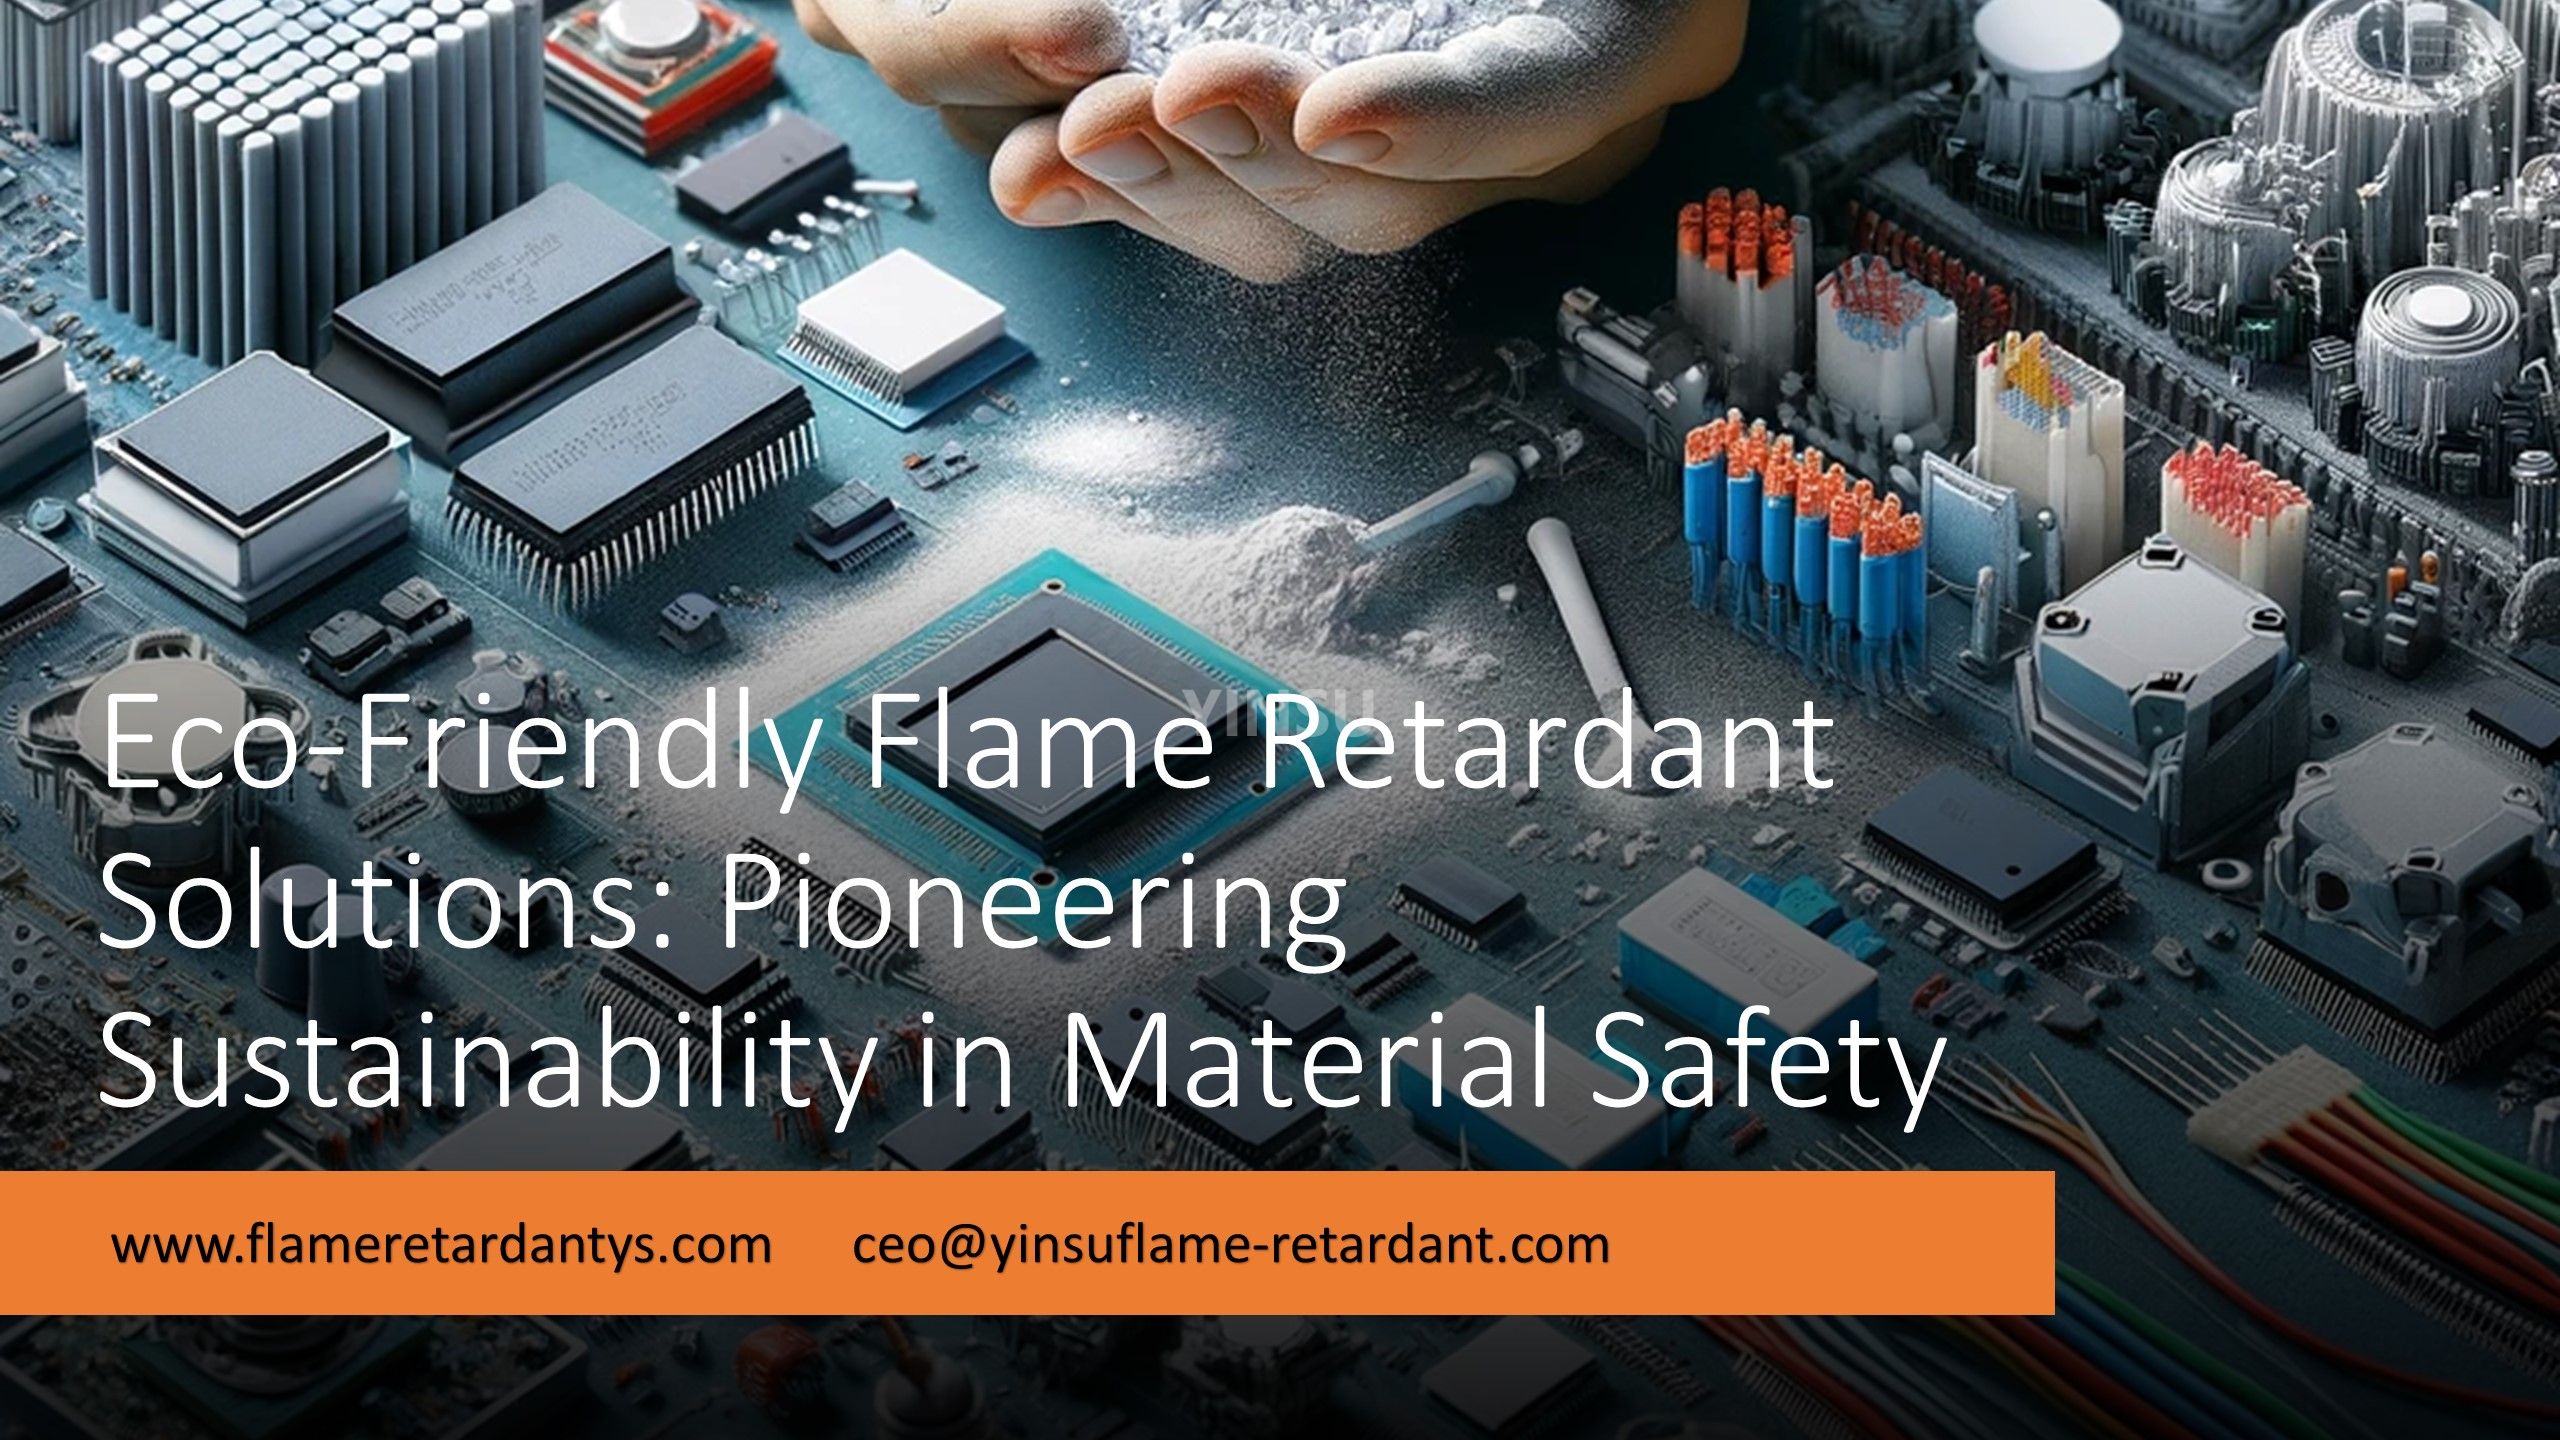 Eco-Friendly Flame Retardant Solutions: Pioneering Sustainability in Material Safety